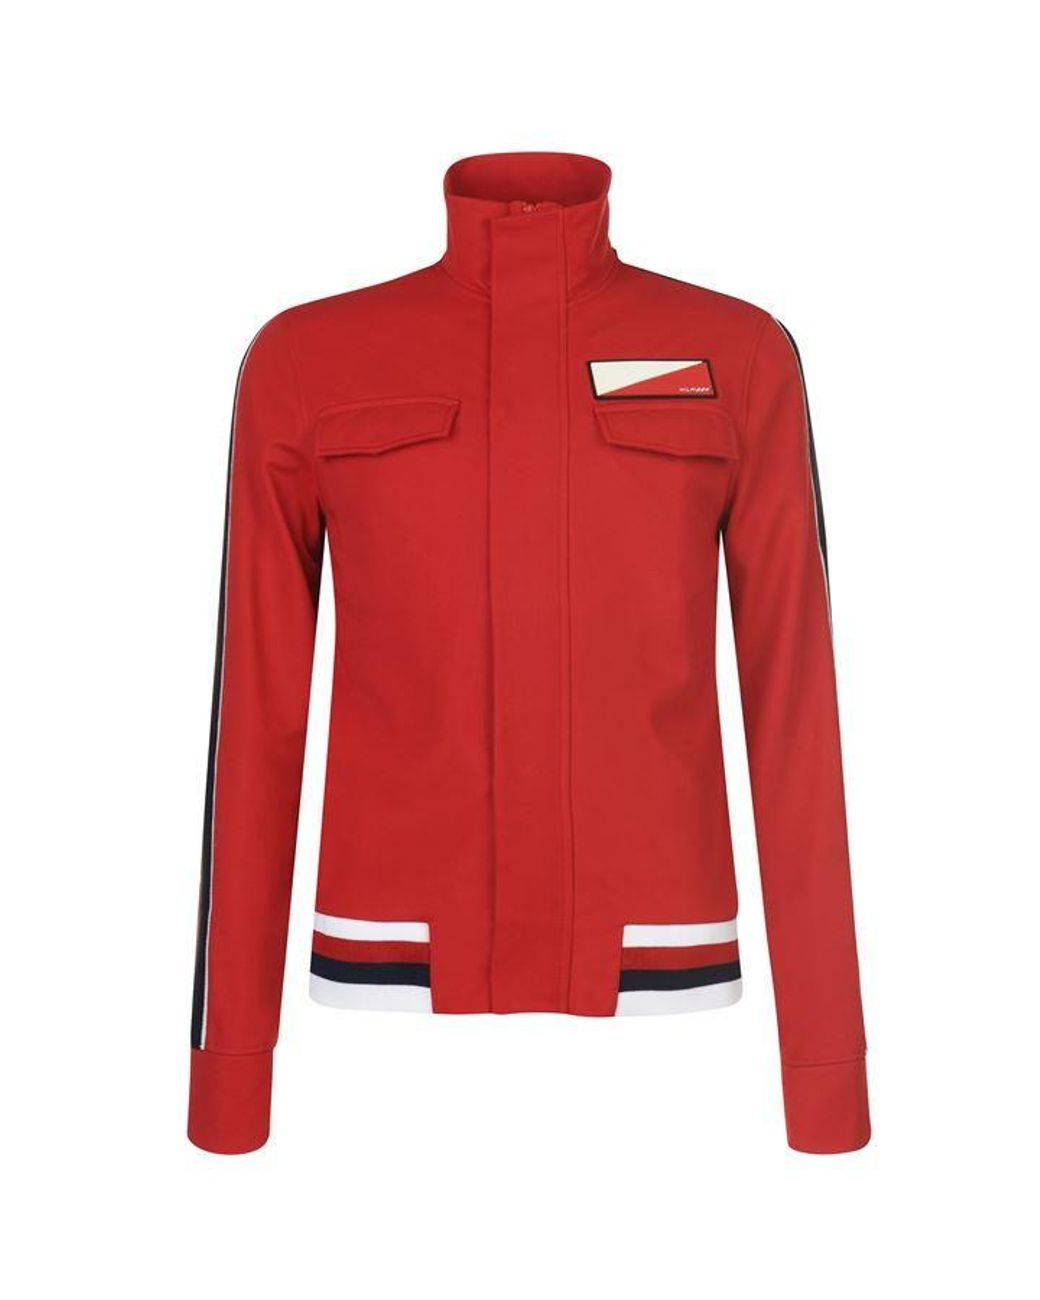 Tommy Hilfiger Synthetic Track Jacket in Red for Men - Lyst